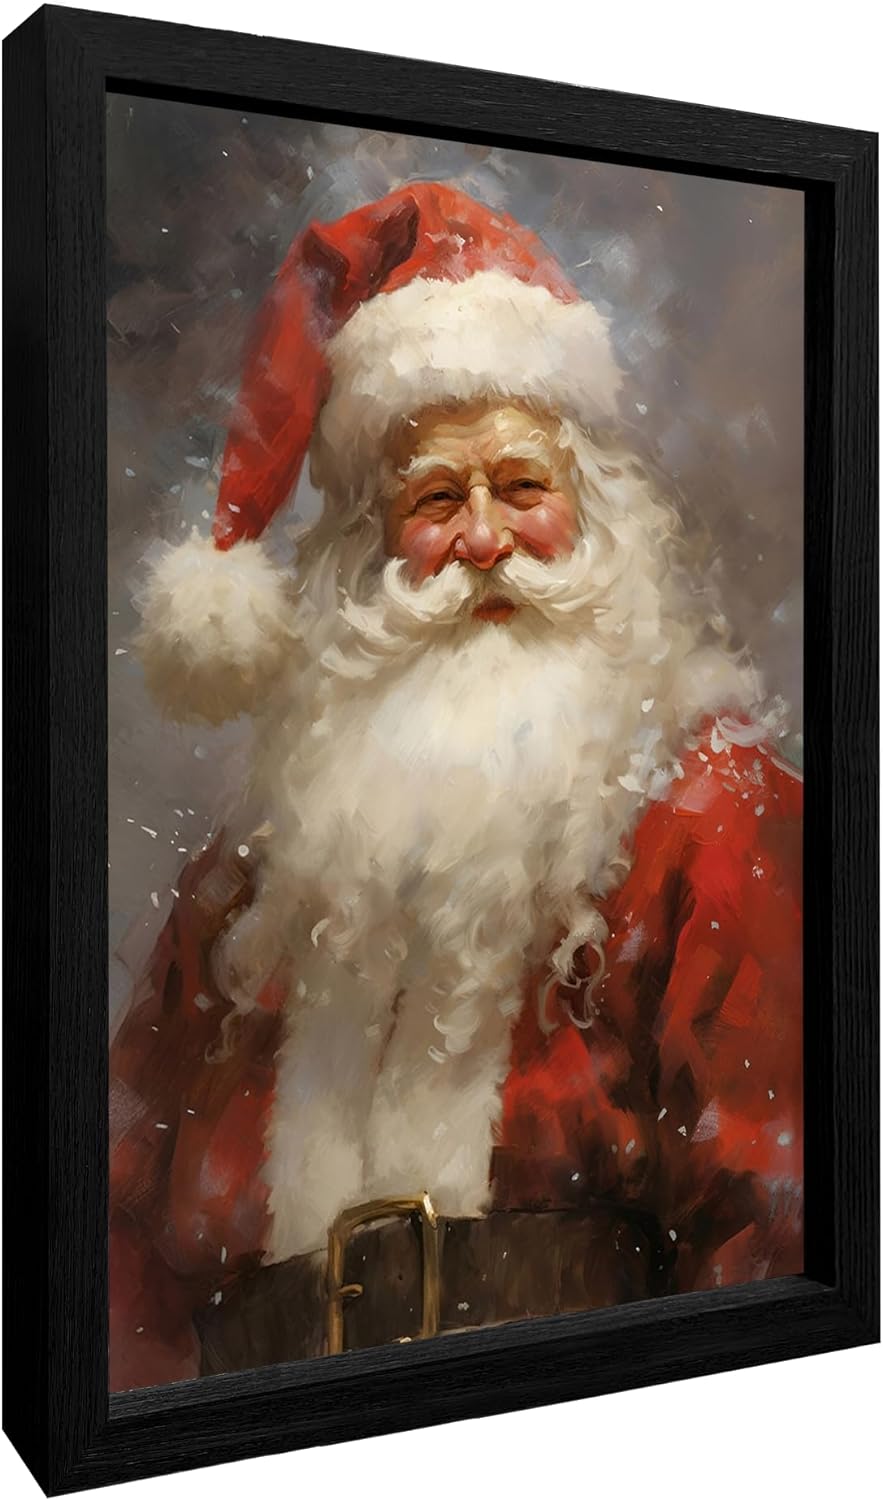 Vintage Christmas Canvas Wall Art Santa Claus Poster Prints Christmas Wall Decor Aesthetic Xmas Posters Room Decor for Gallery Living Room (Framed,12X16)